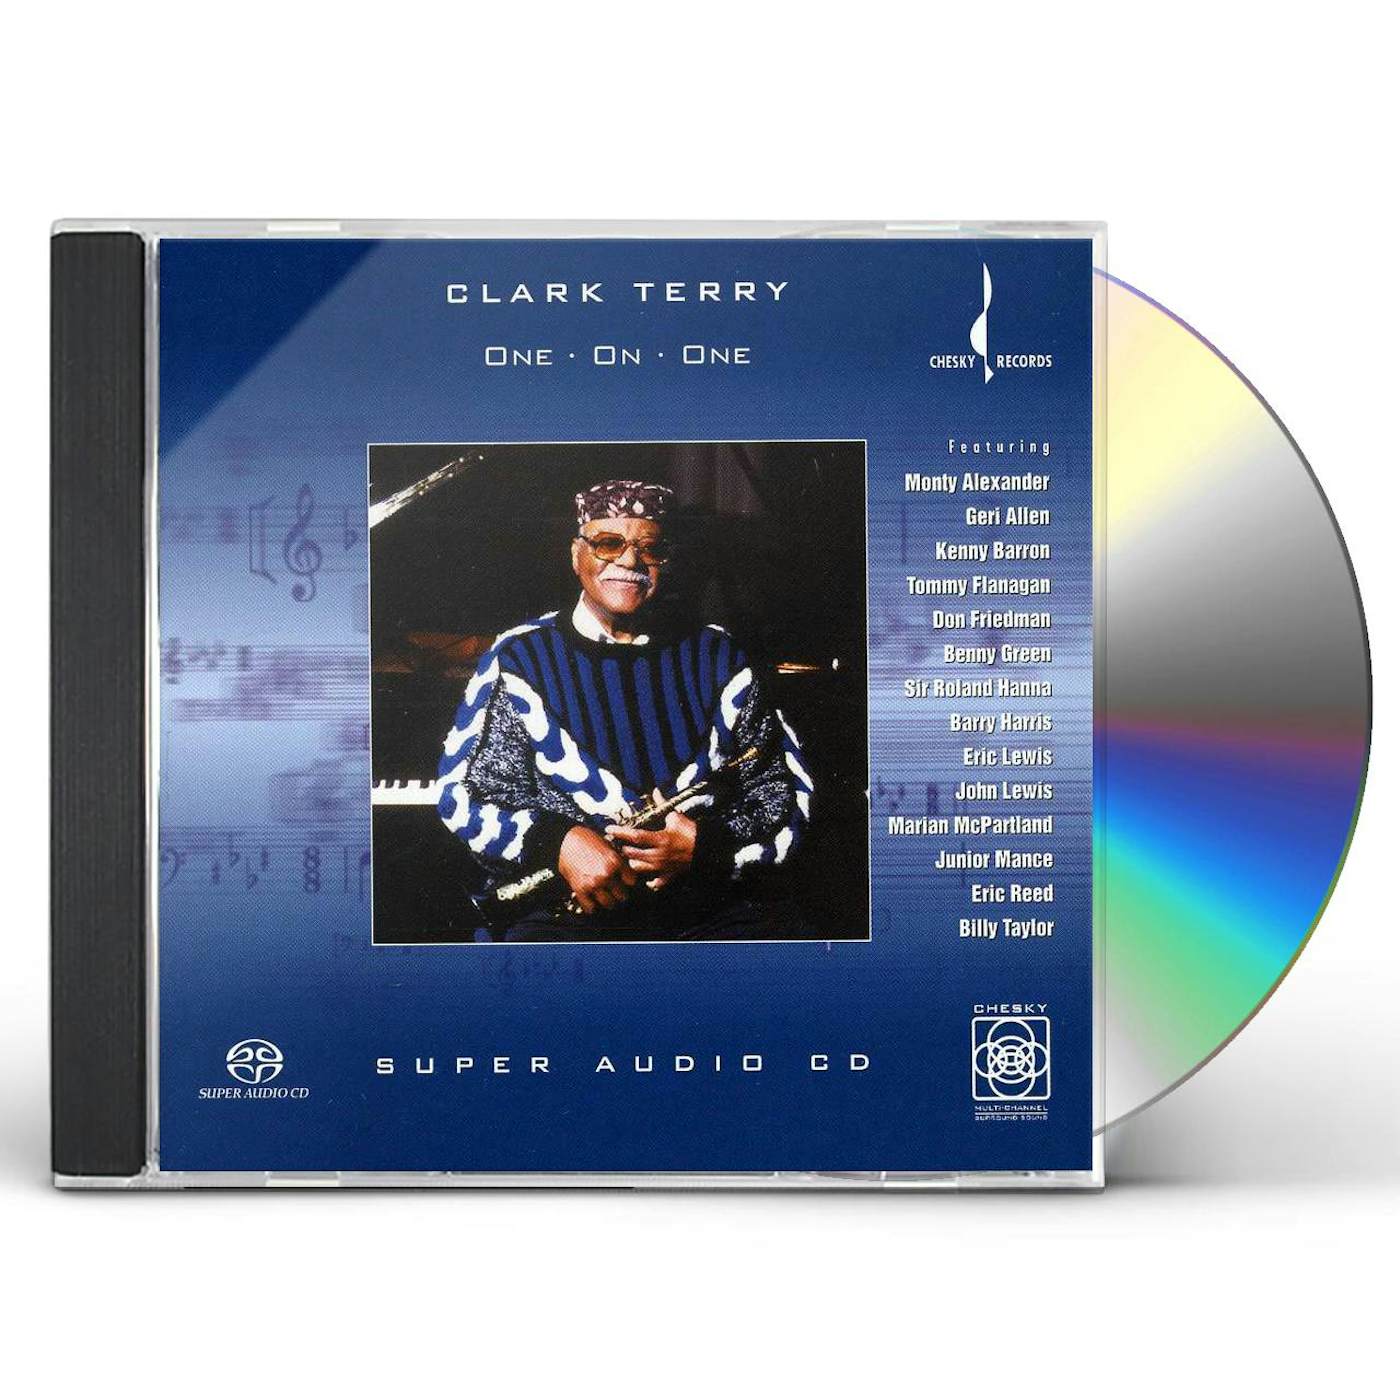 Clark Terry ONE ON ONE CD